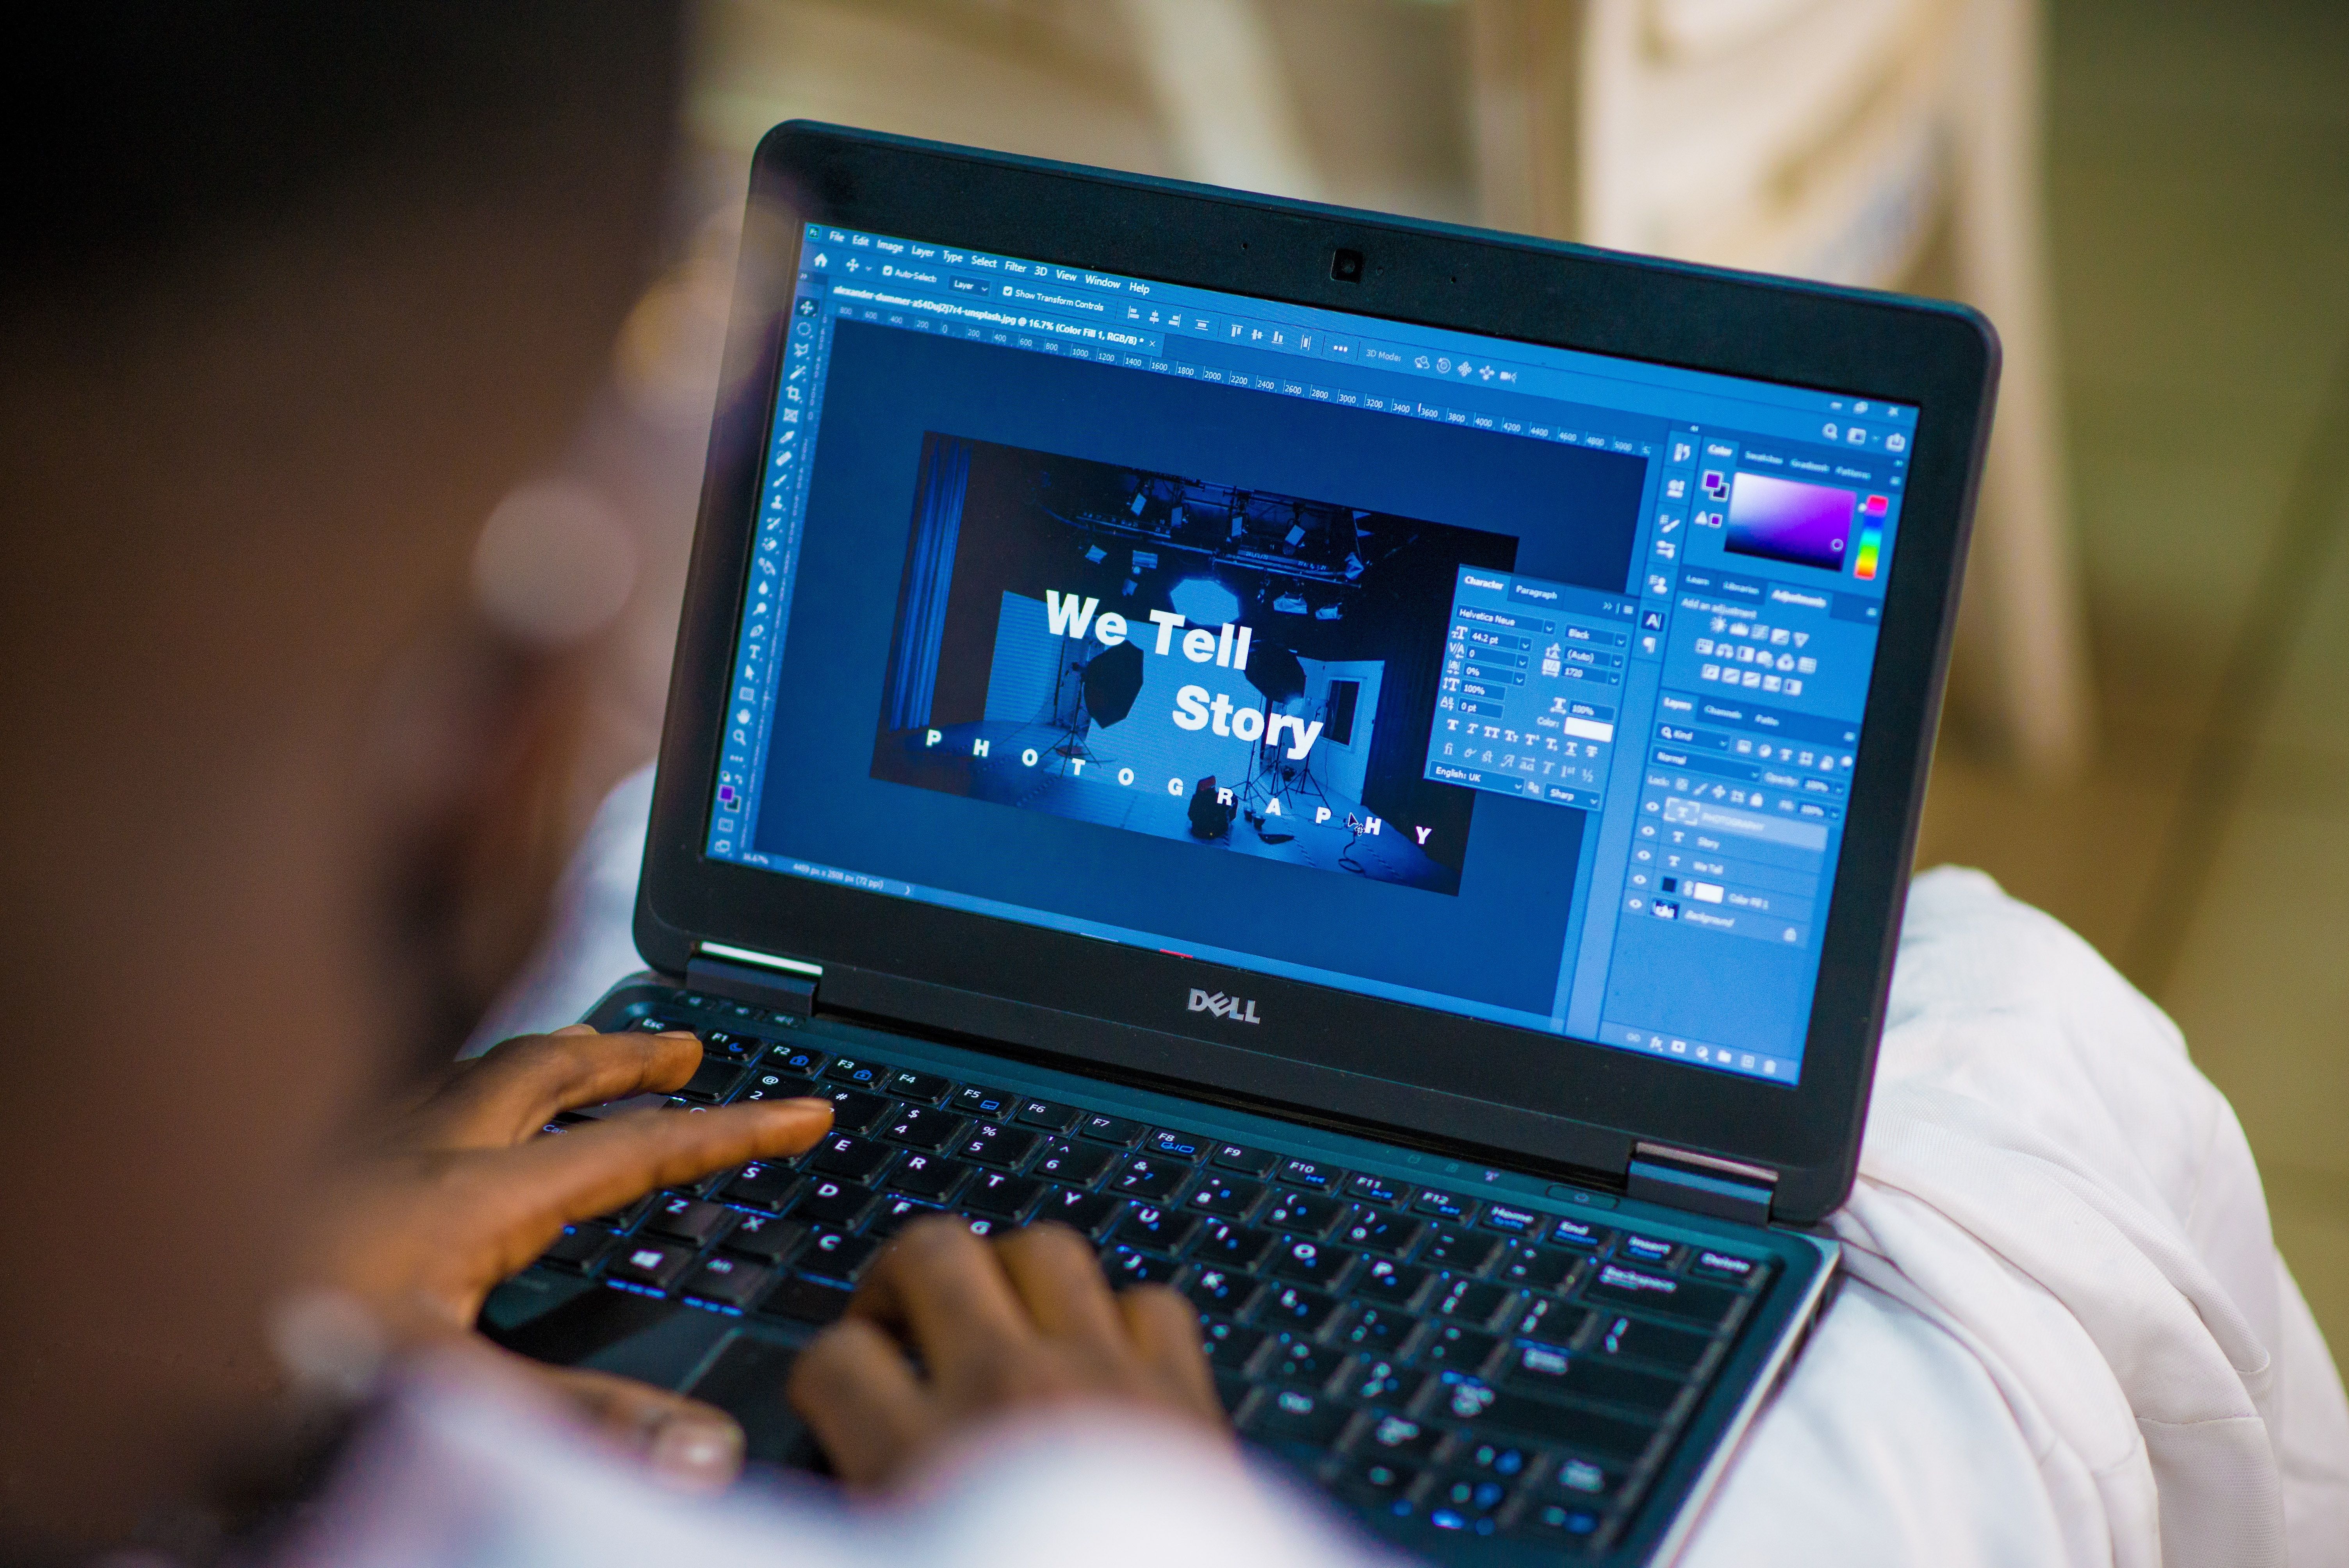 A person adjusting a graphic design layout in Photoshop.